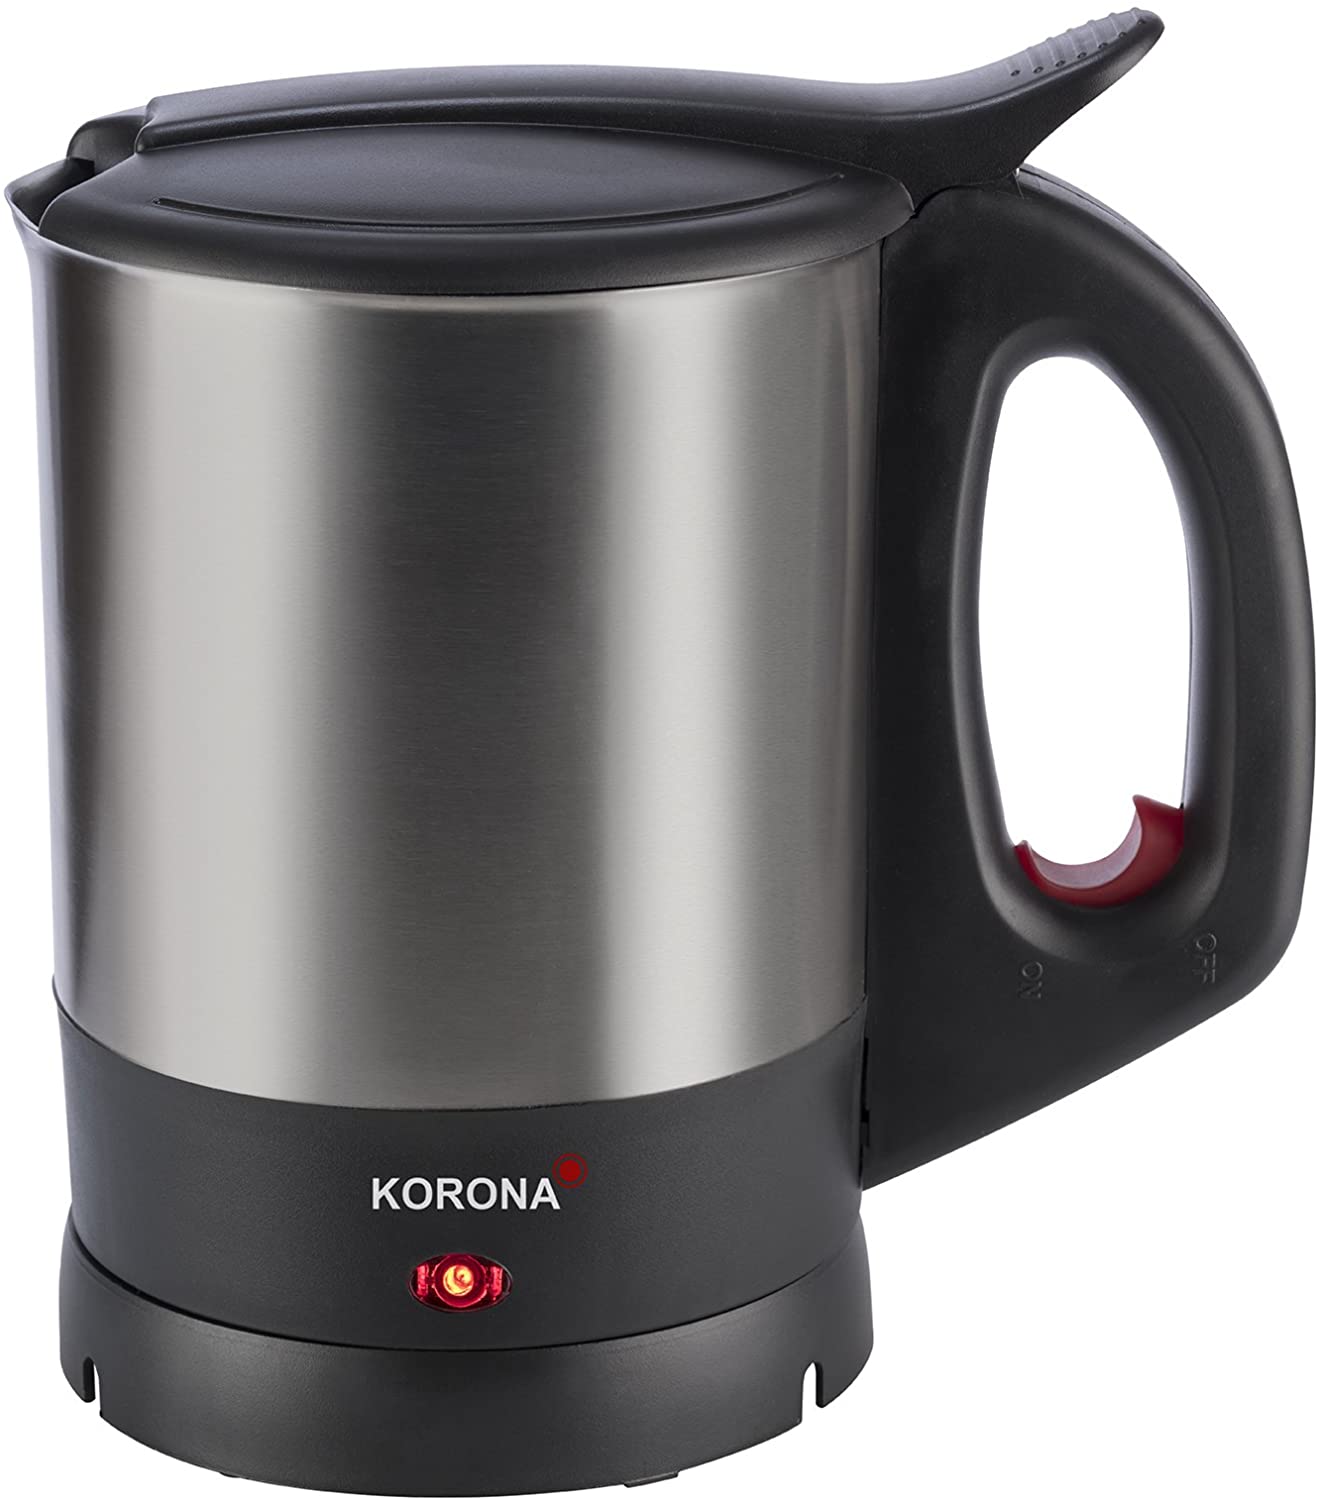 Korona 20140 Kettle | Black Stainless Steel | 1.5 Litres | with Powerful 2200 Watt | Classic Compact